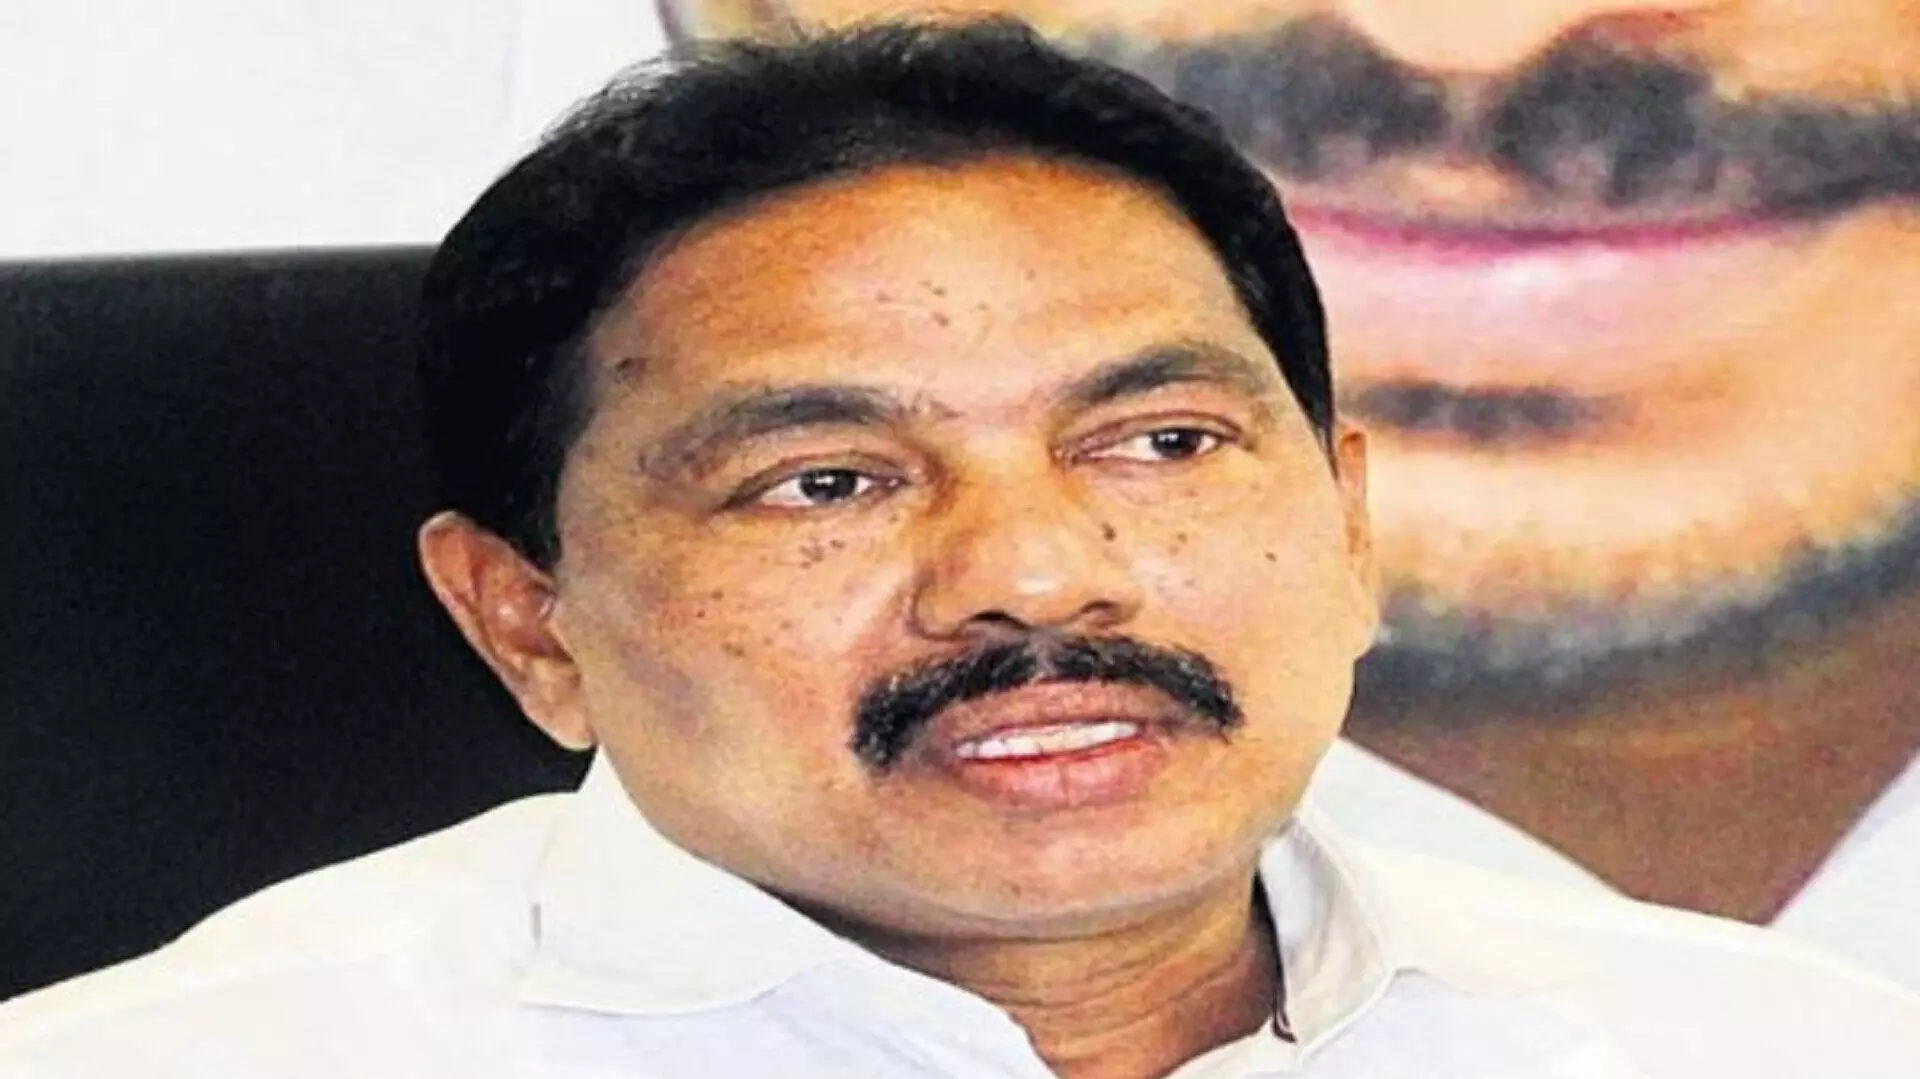 APSRTC to implement highest pension for employees: Minster Pinipe Vishwarup